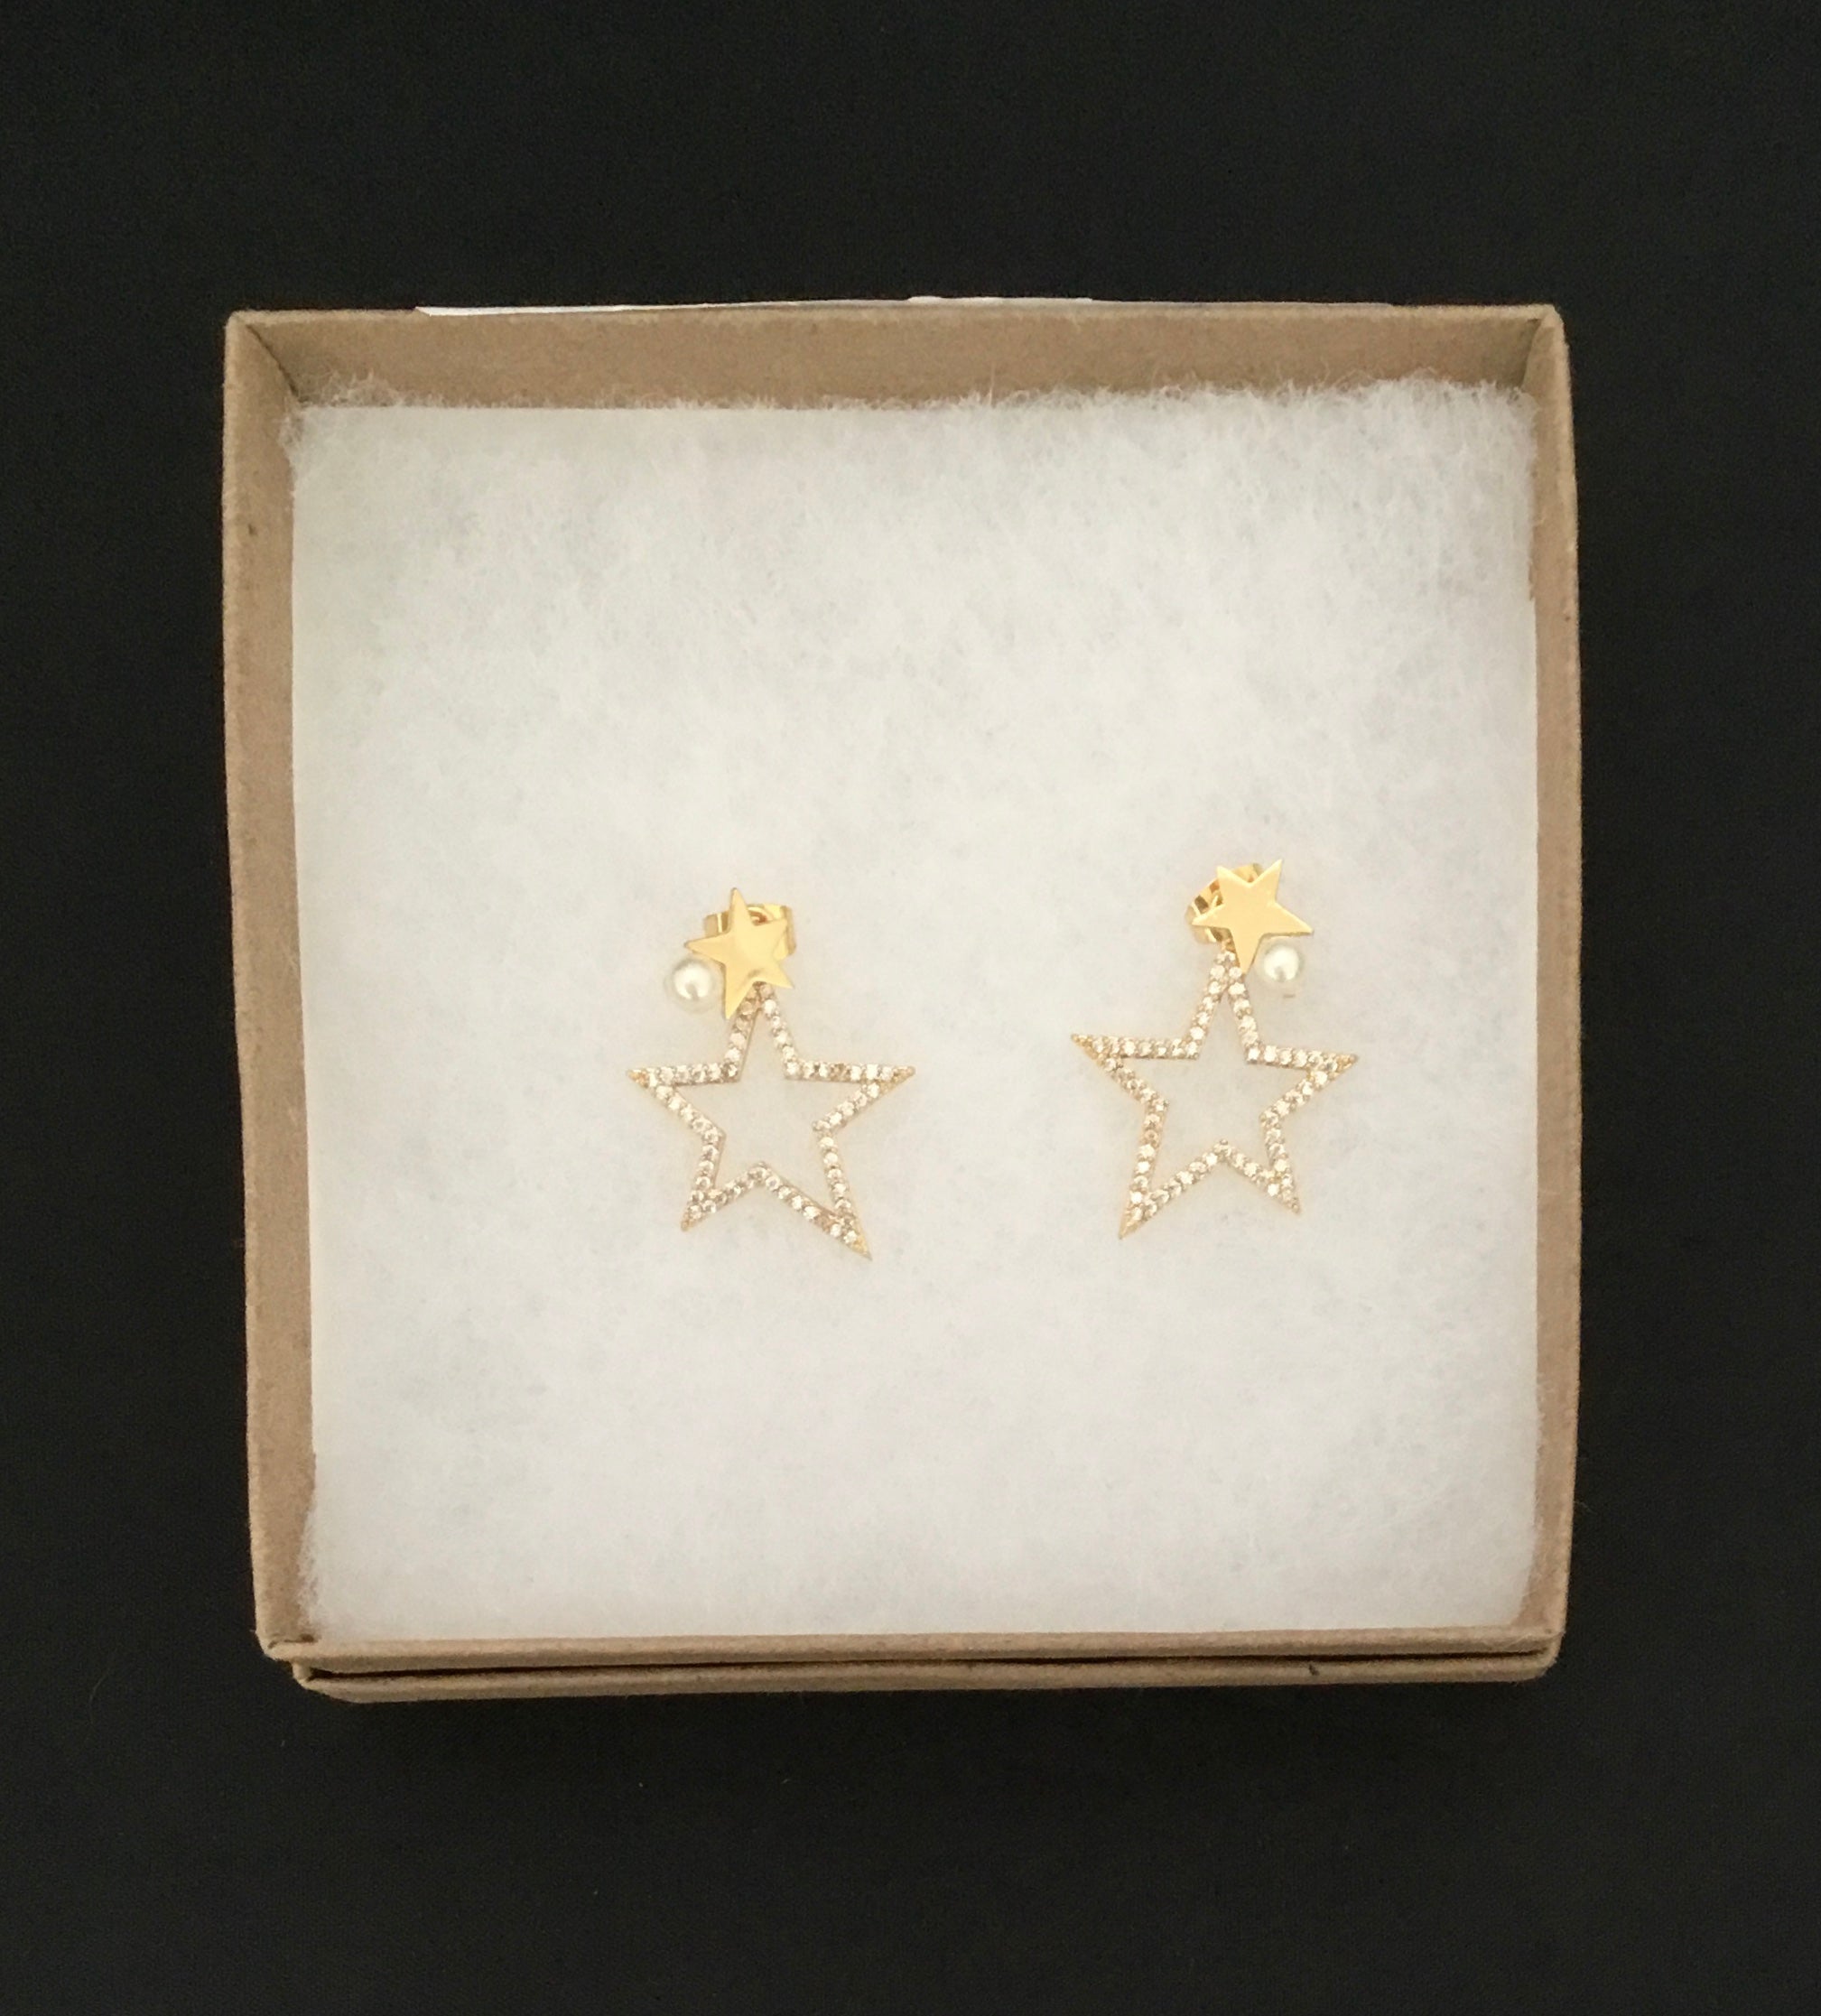 Gold Filled Star Earring with Crystal and Pearl